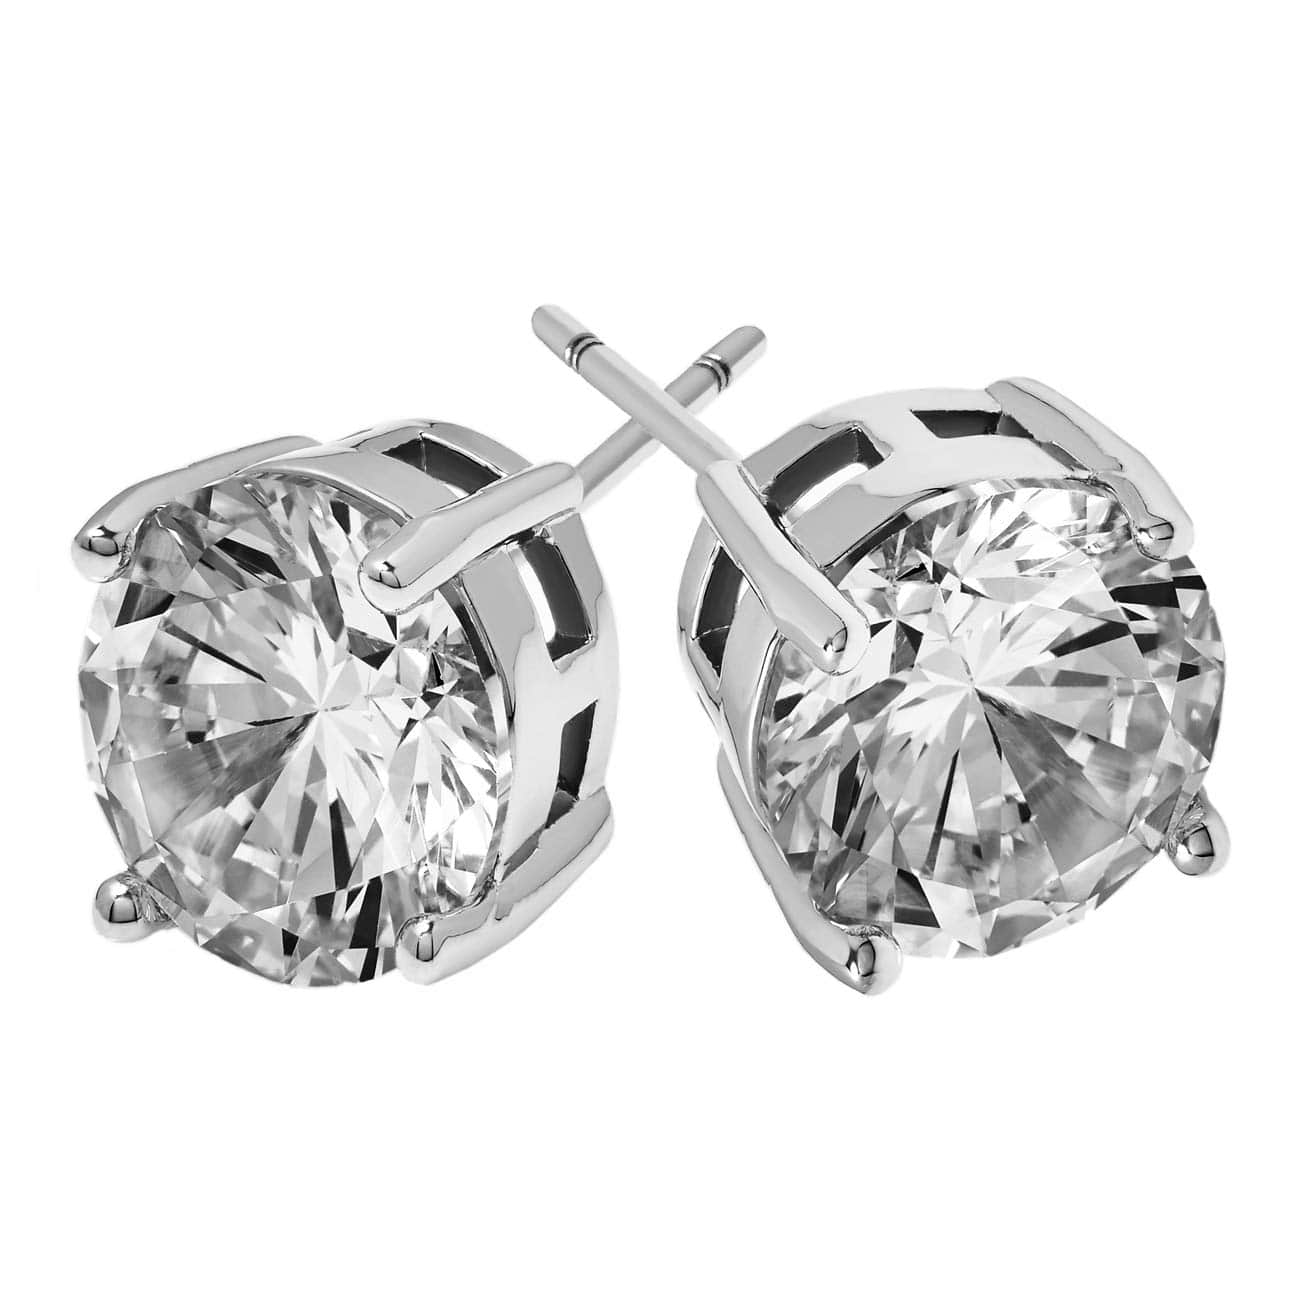 Lineage 3935.2, 3935.5 Set with Signature Pen and Stud Earrings